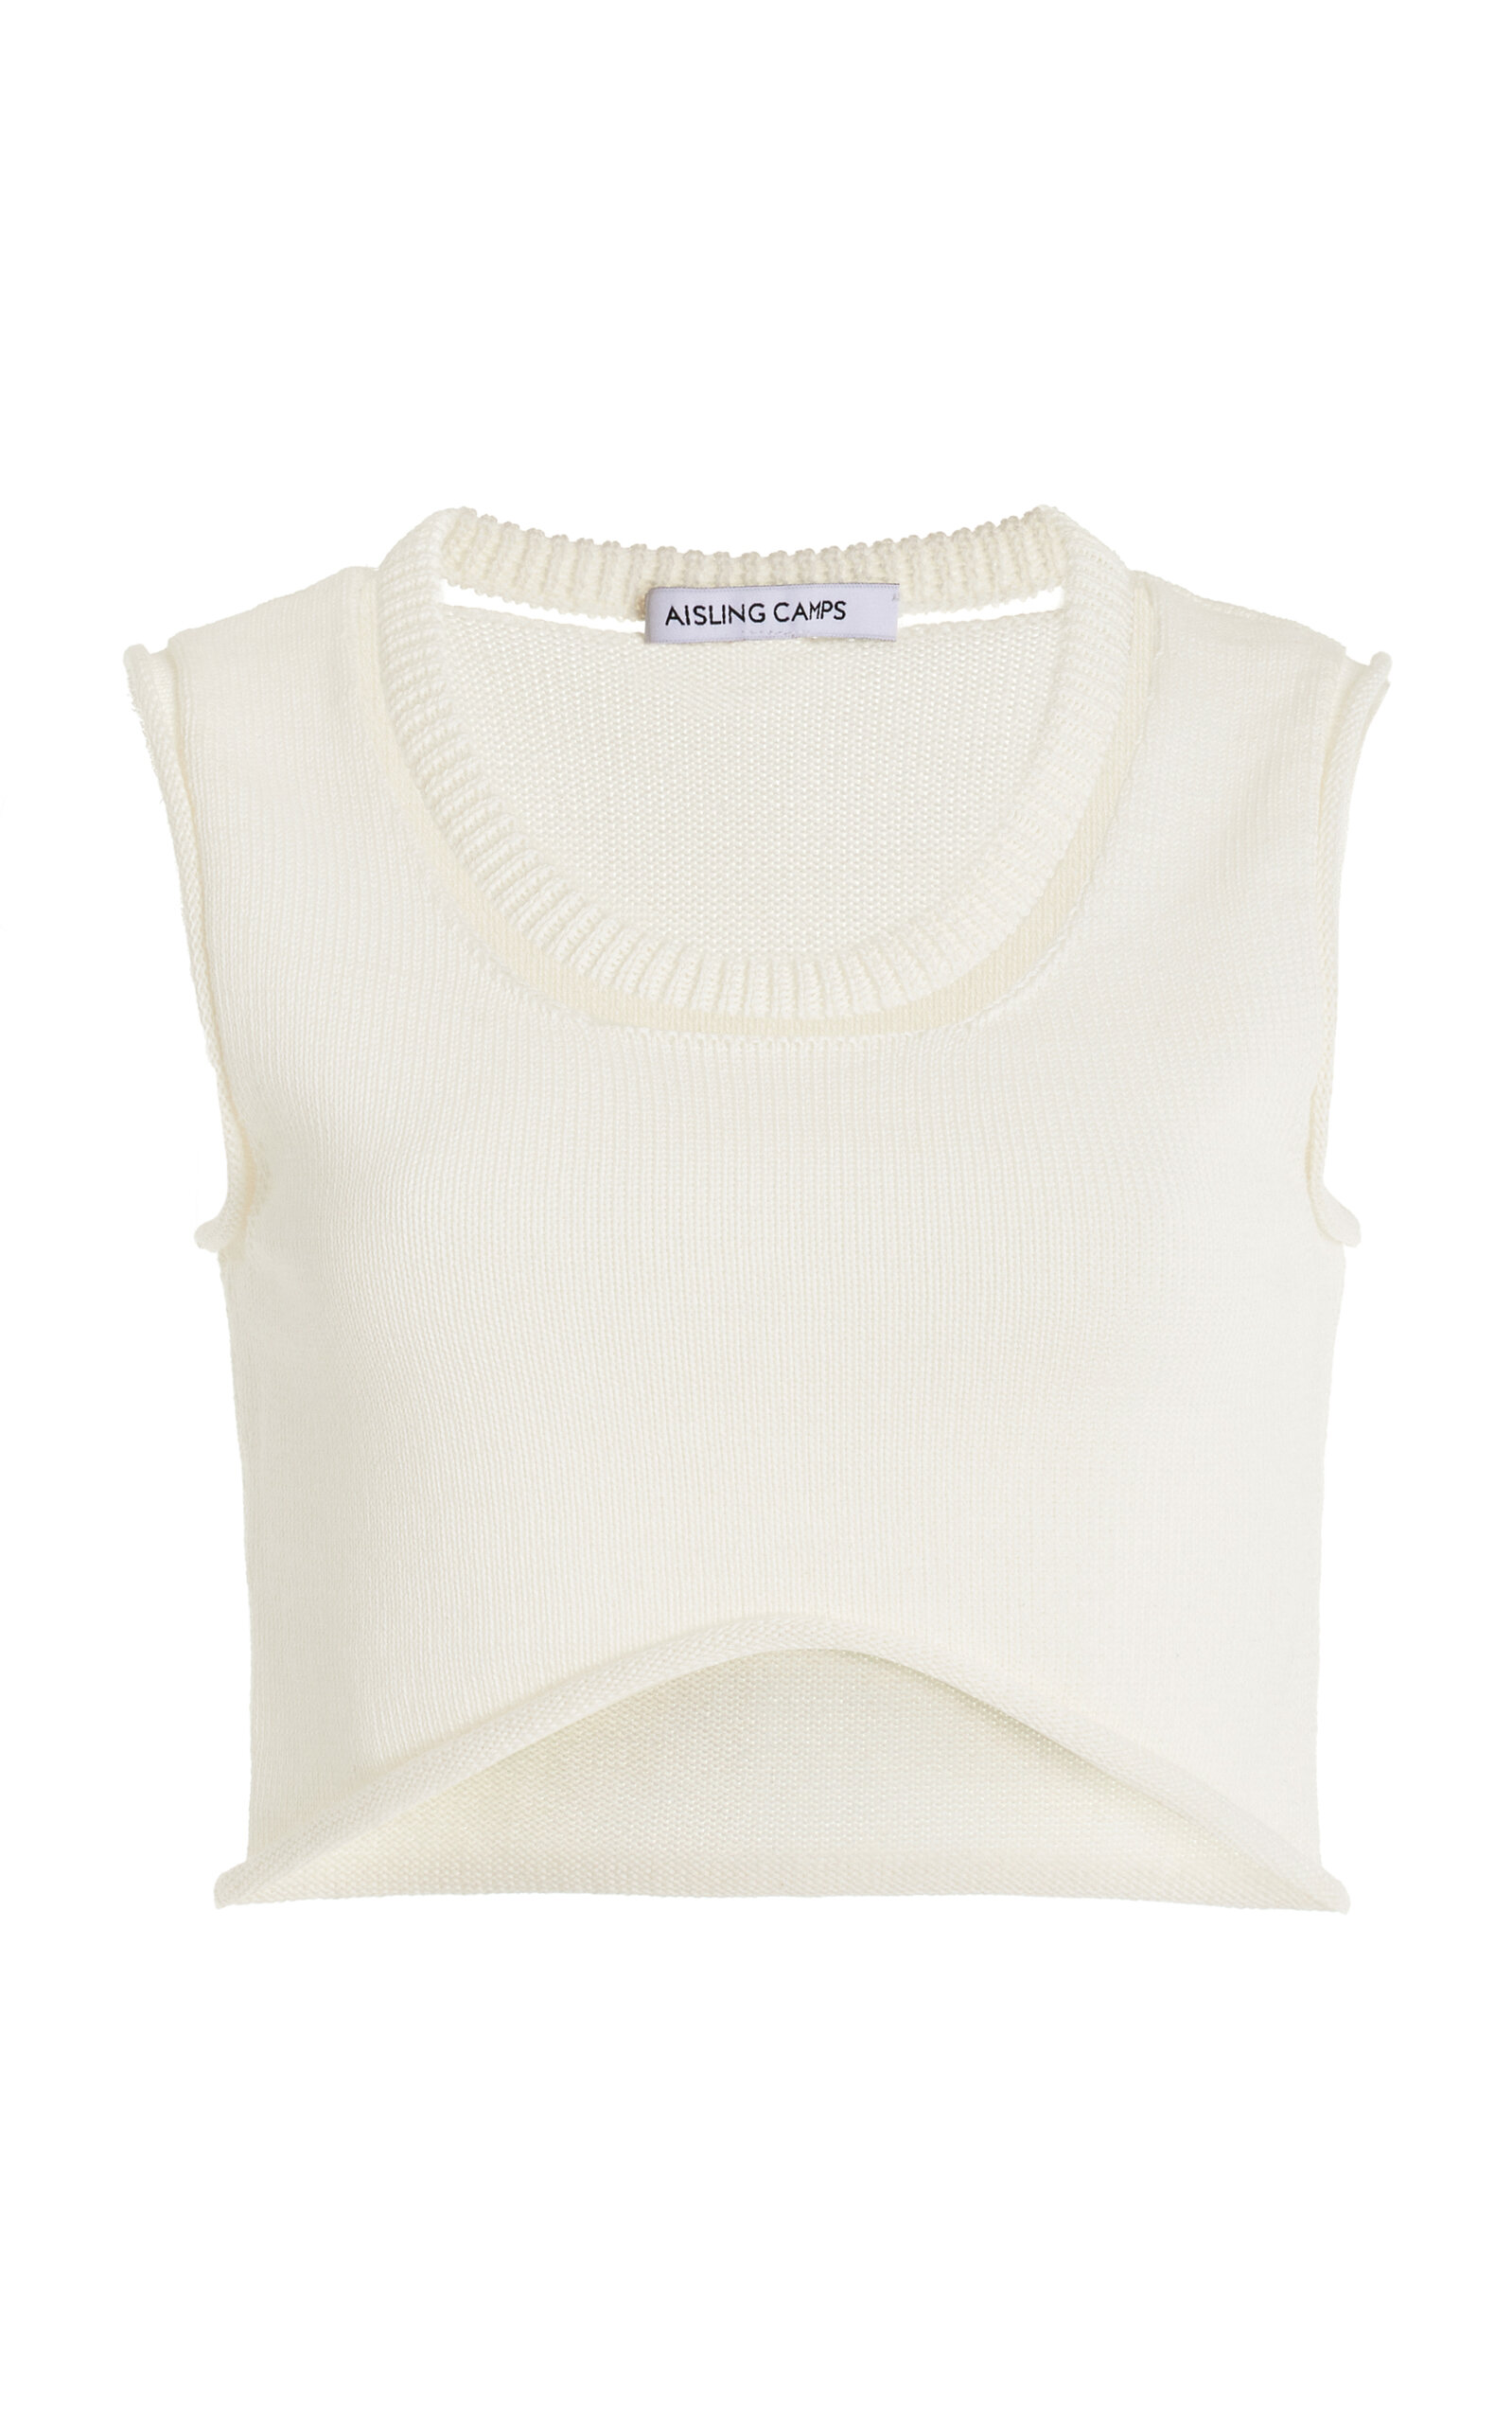 Floating-Neck Cotton Top